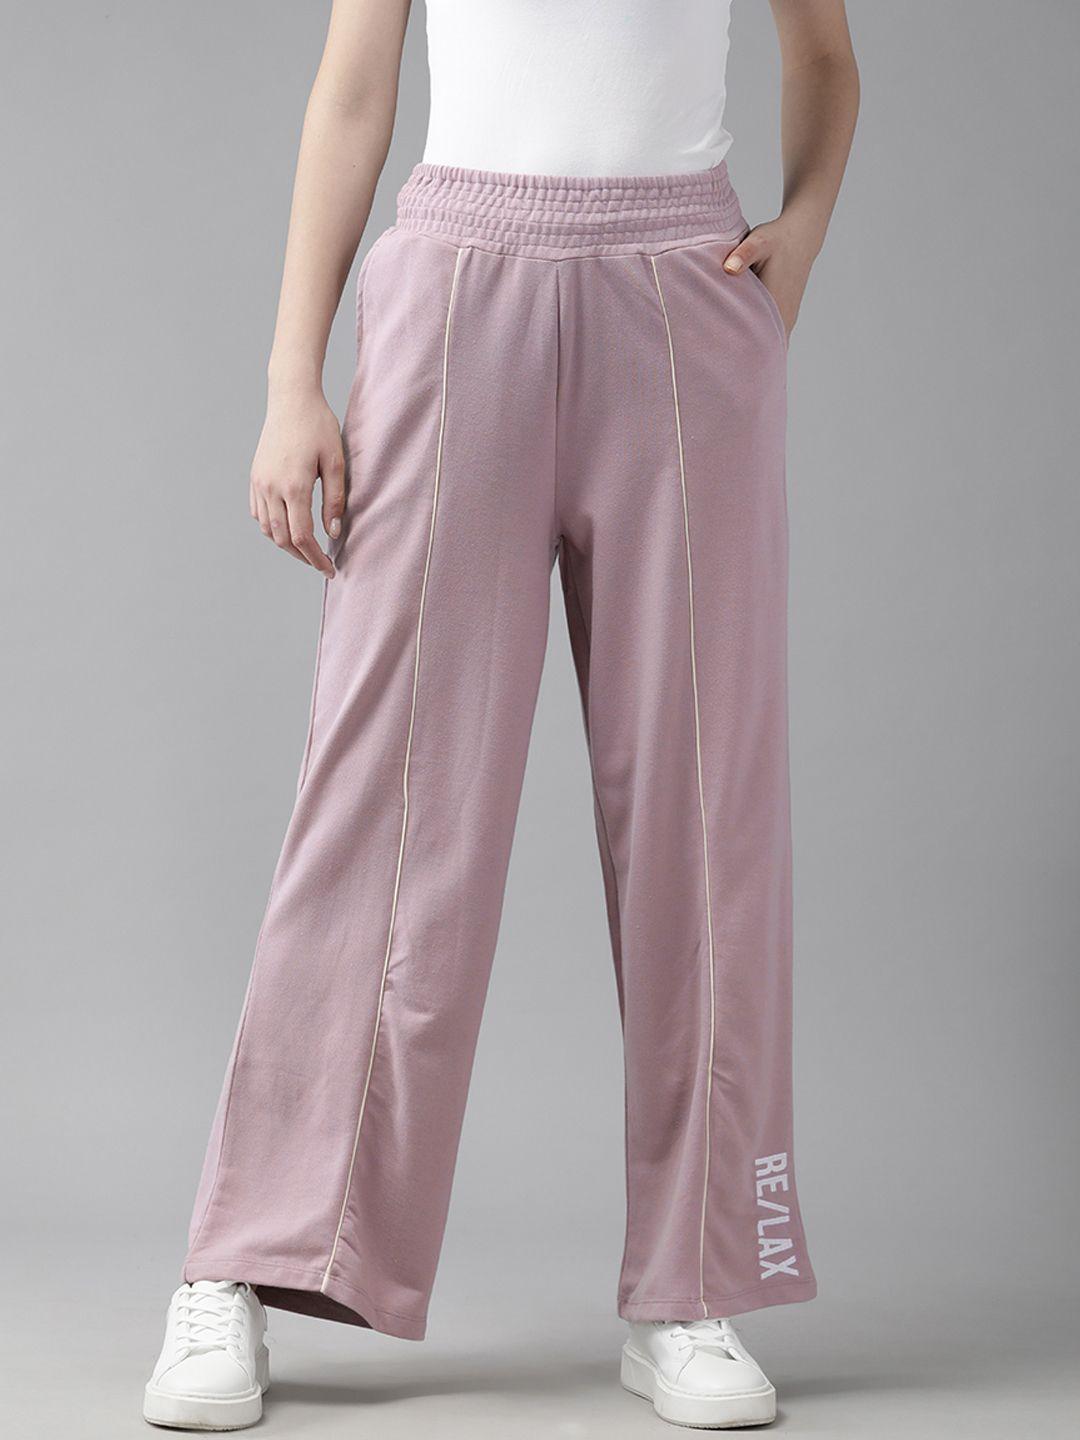 the roadster lifestyle co. women wide leg track pants